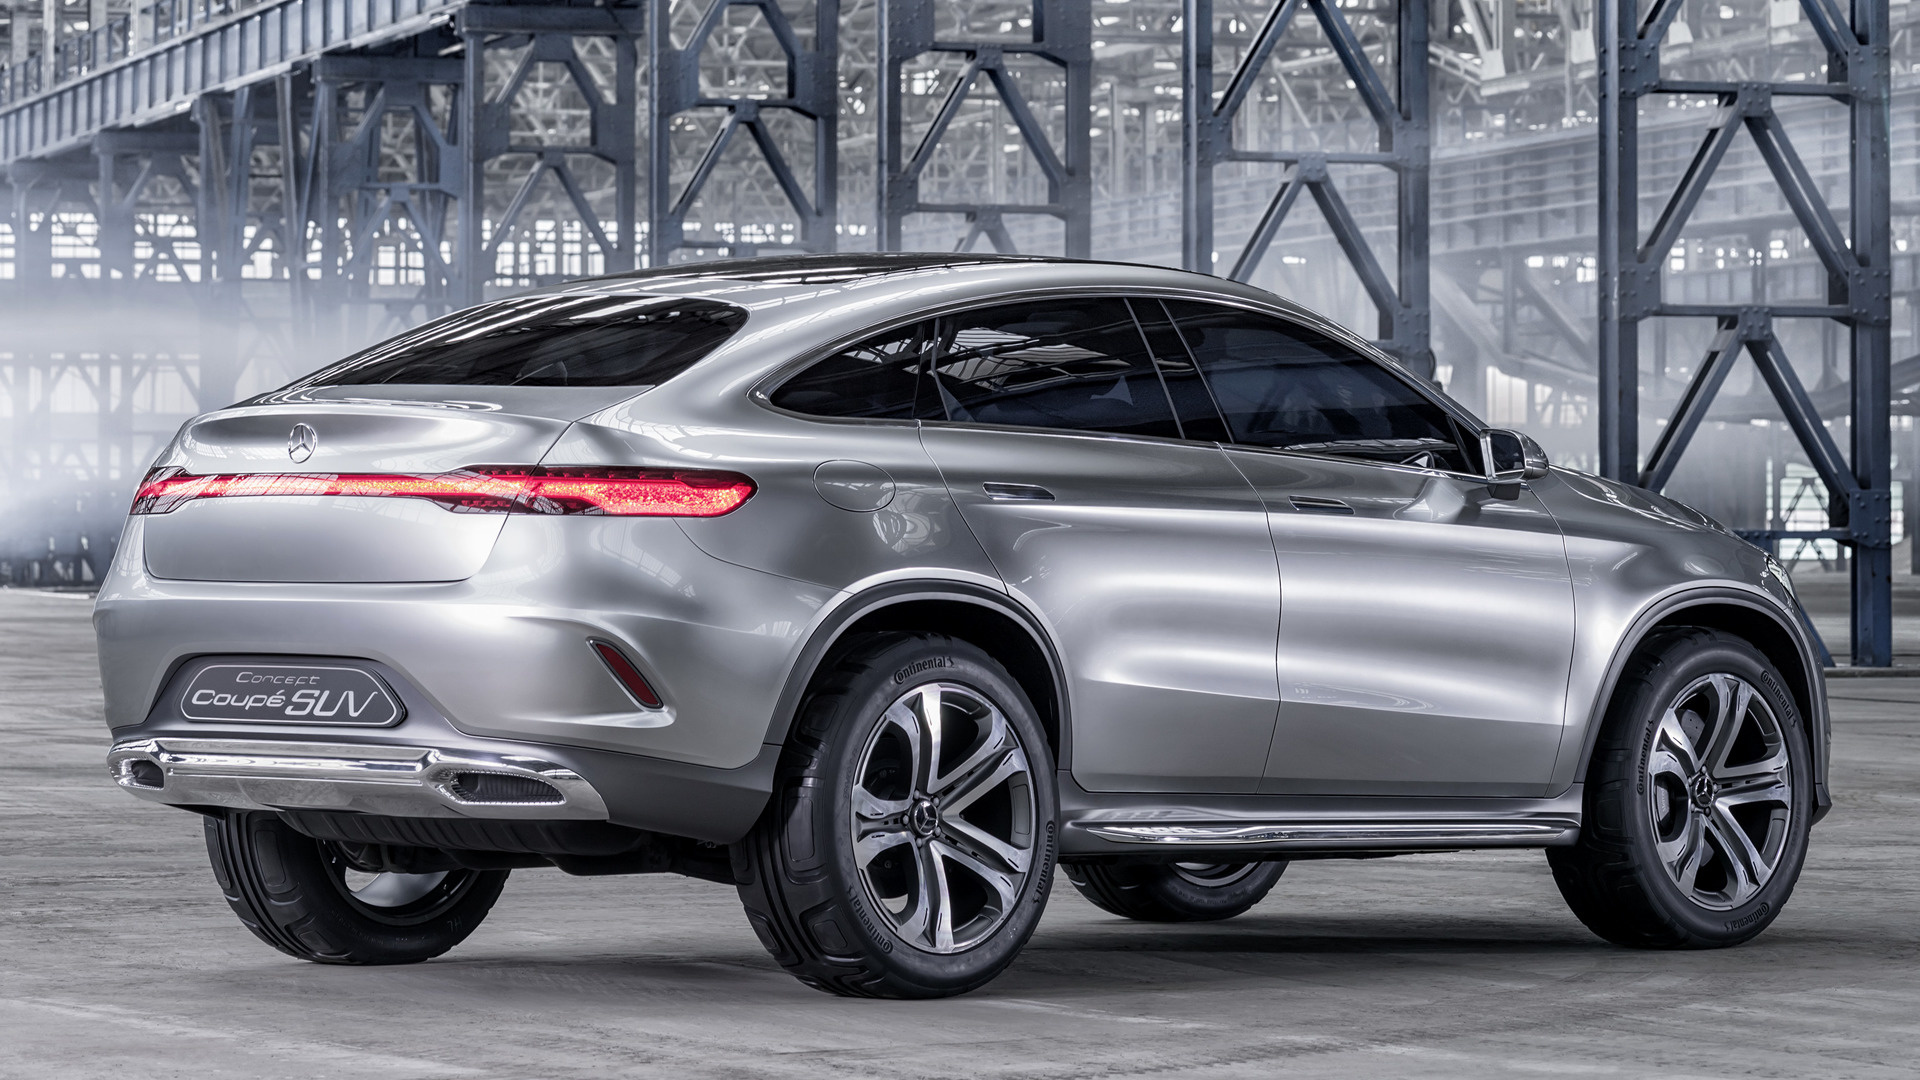 2014 Mercedes-Benz Concept Coupe SUV - Wallpapers and HD Images | Car Pixel